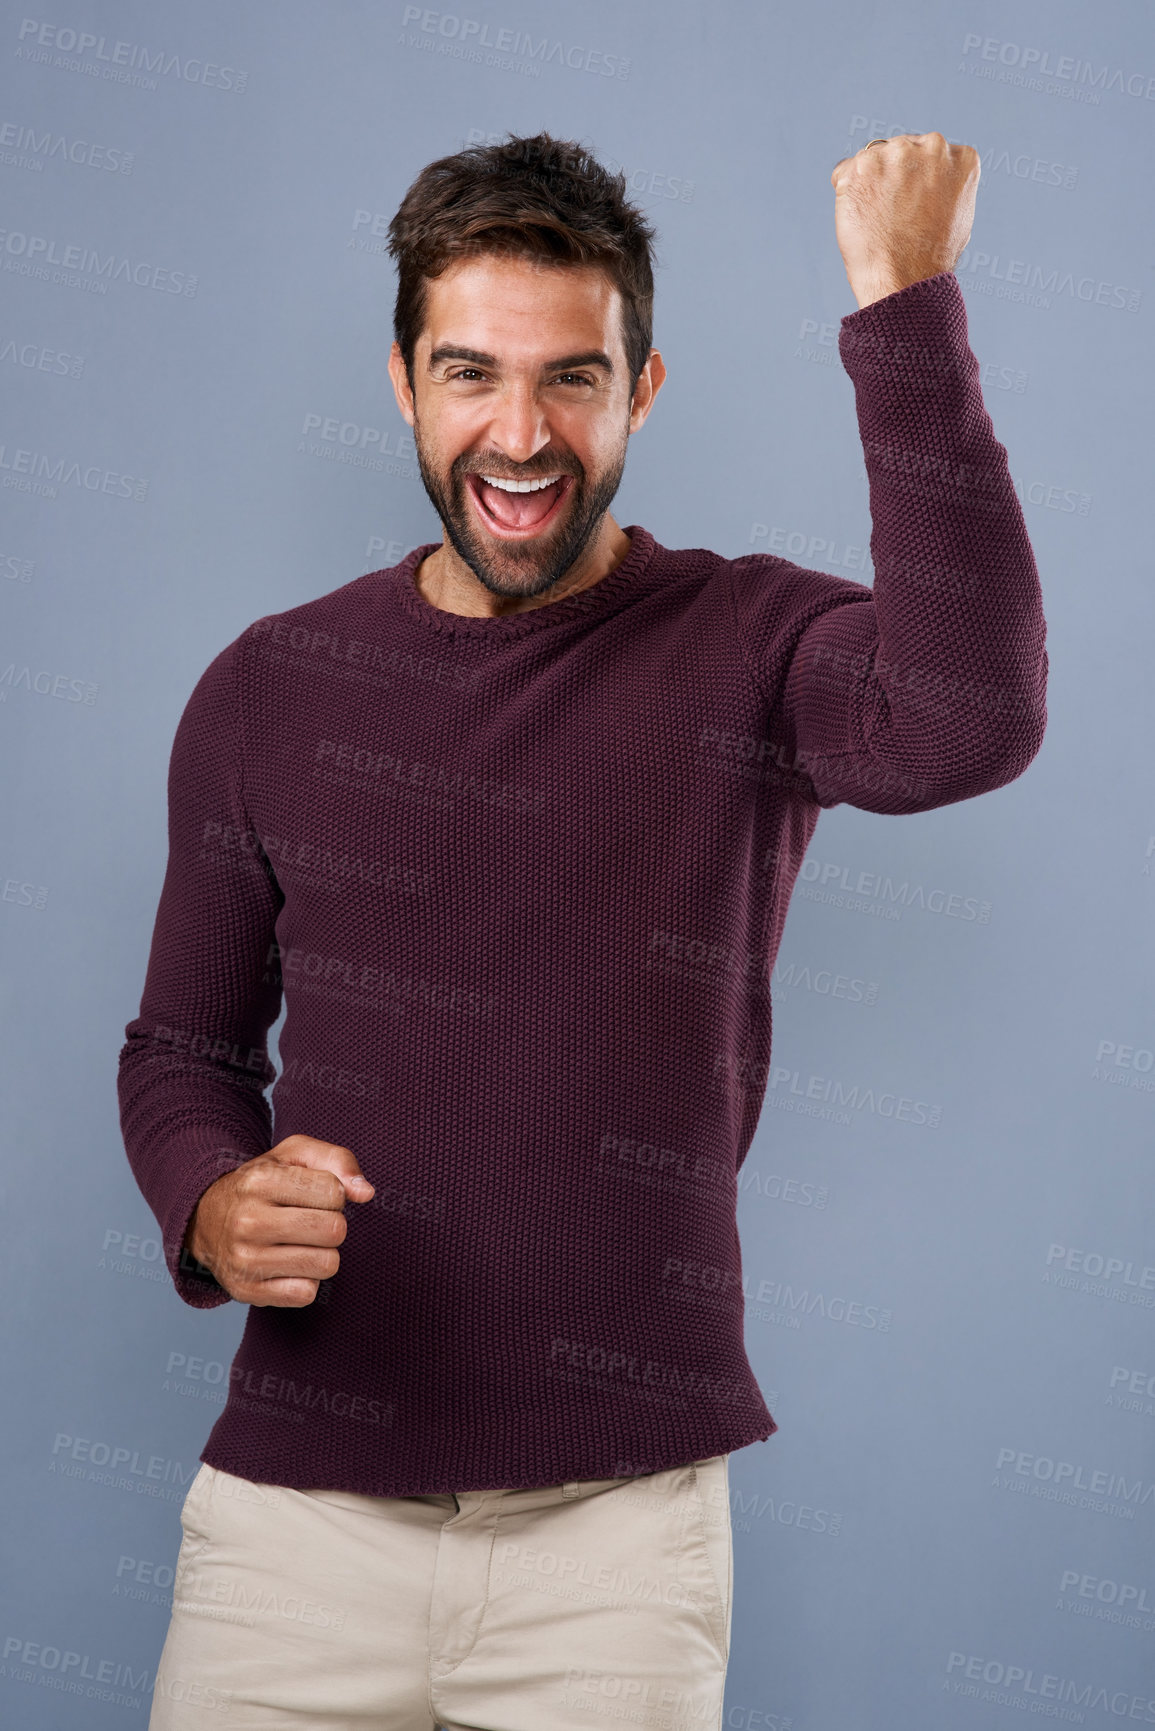 Buy stock photo Studio shot of a handsome young man cheering against a gray background